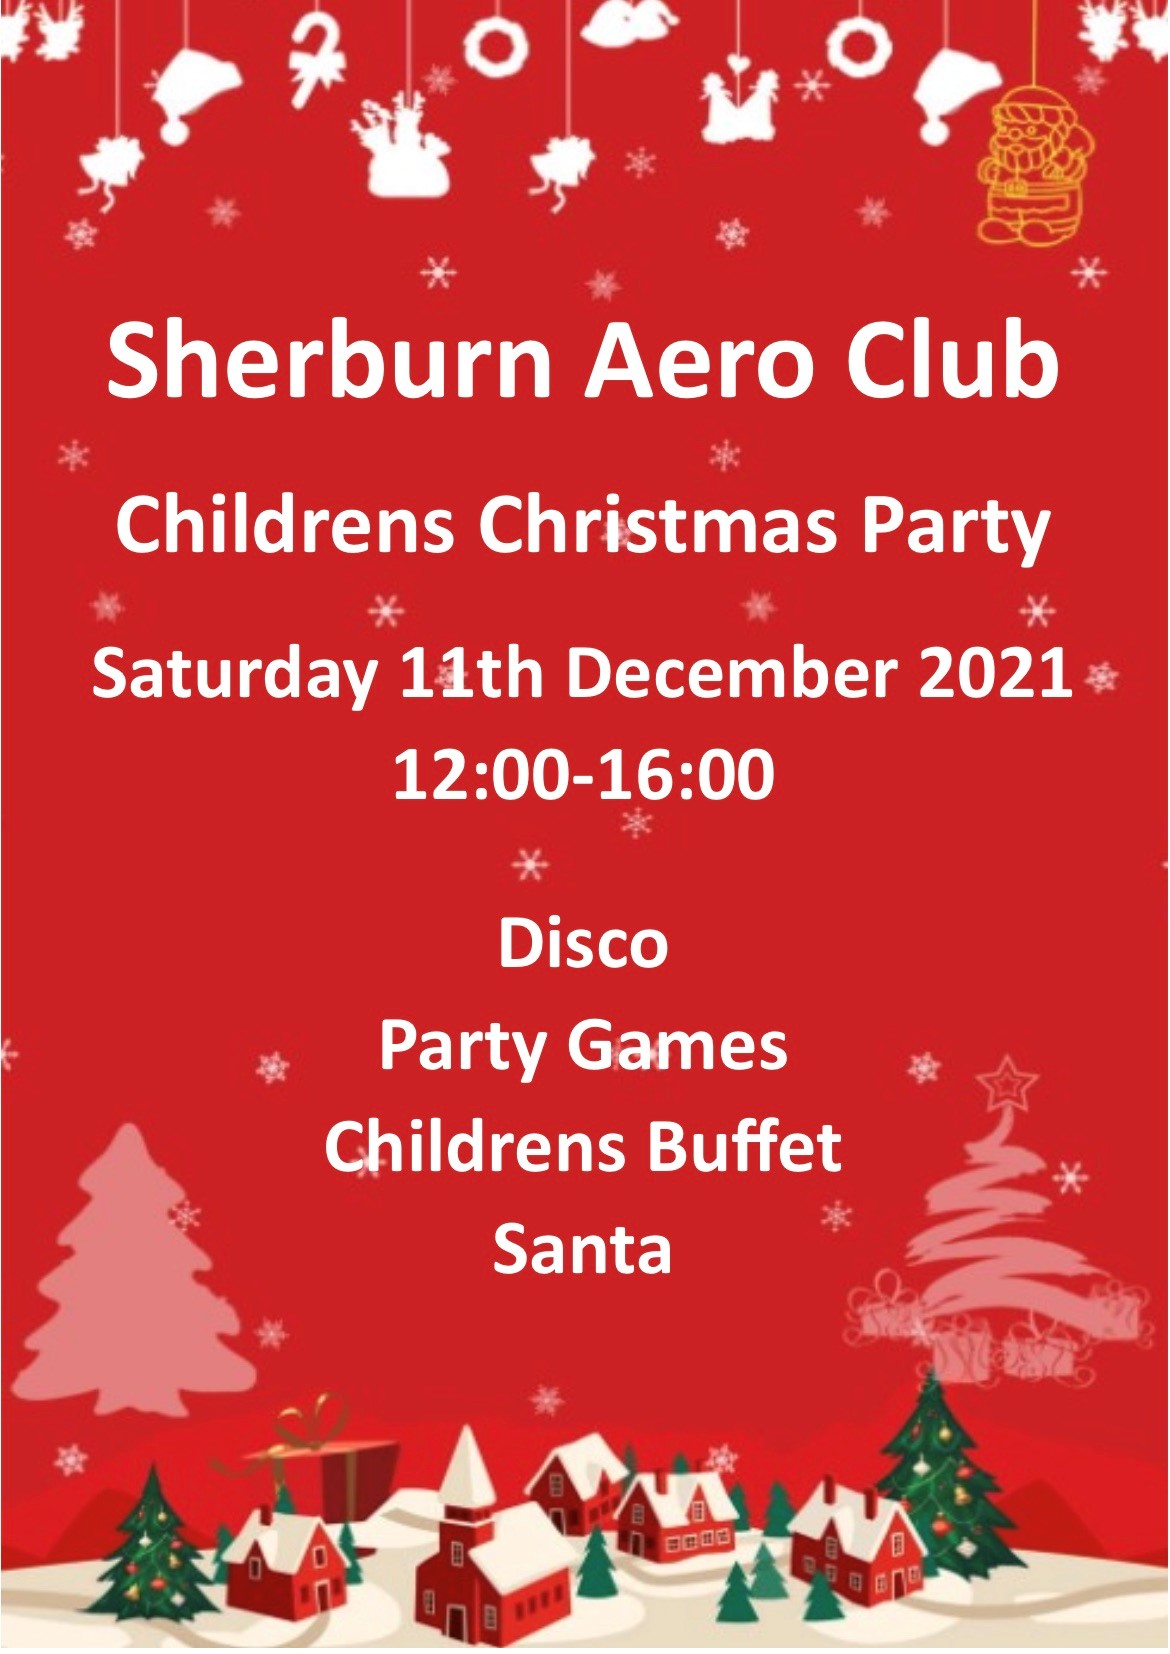 SAC Under 12's Children's Christmas Party 2021